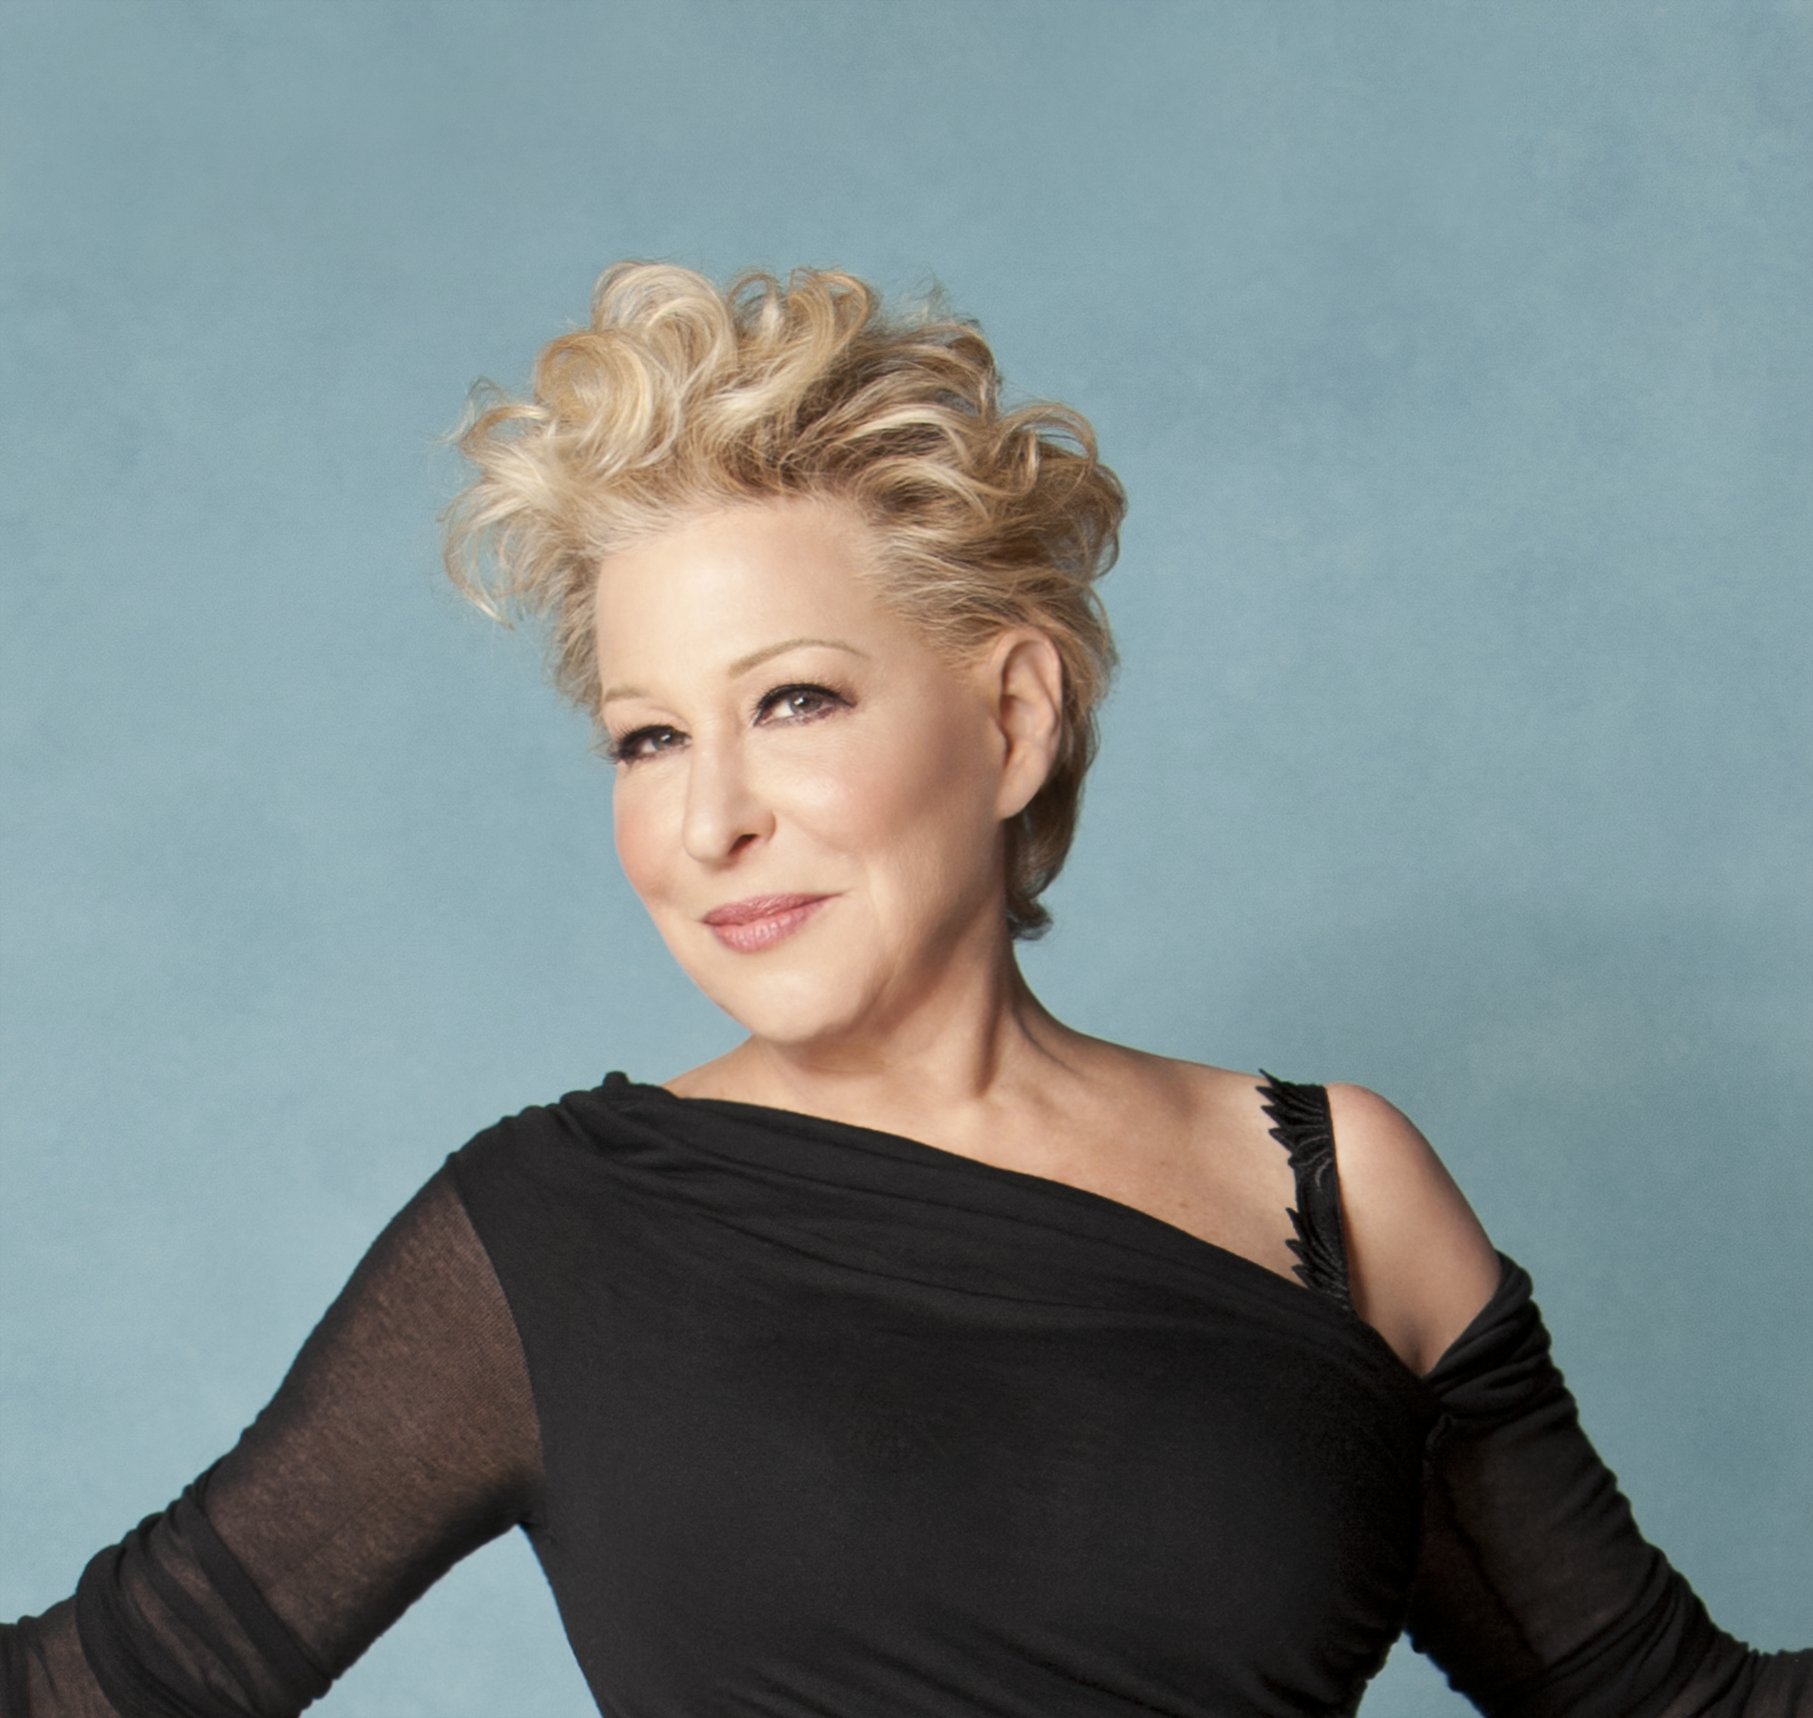 Multitalented Bette Midler has all kinds of plans for the future.